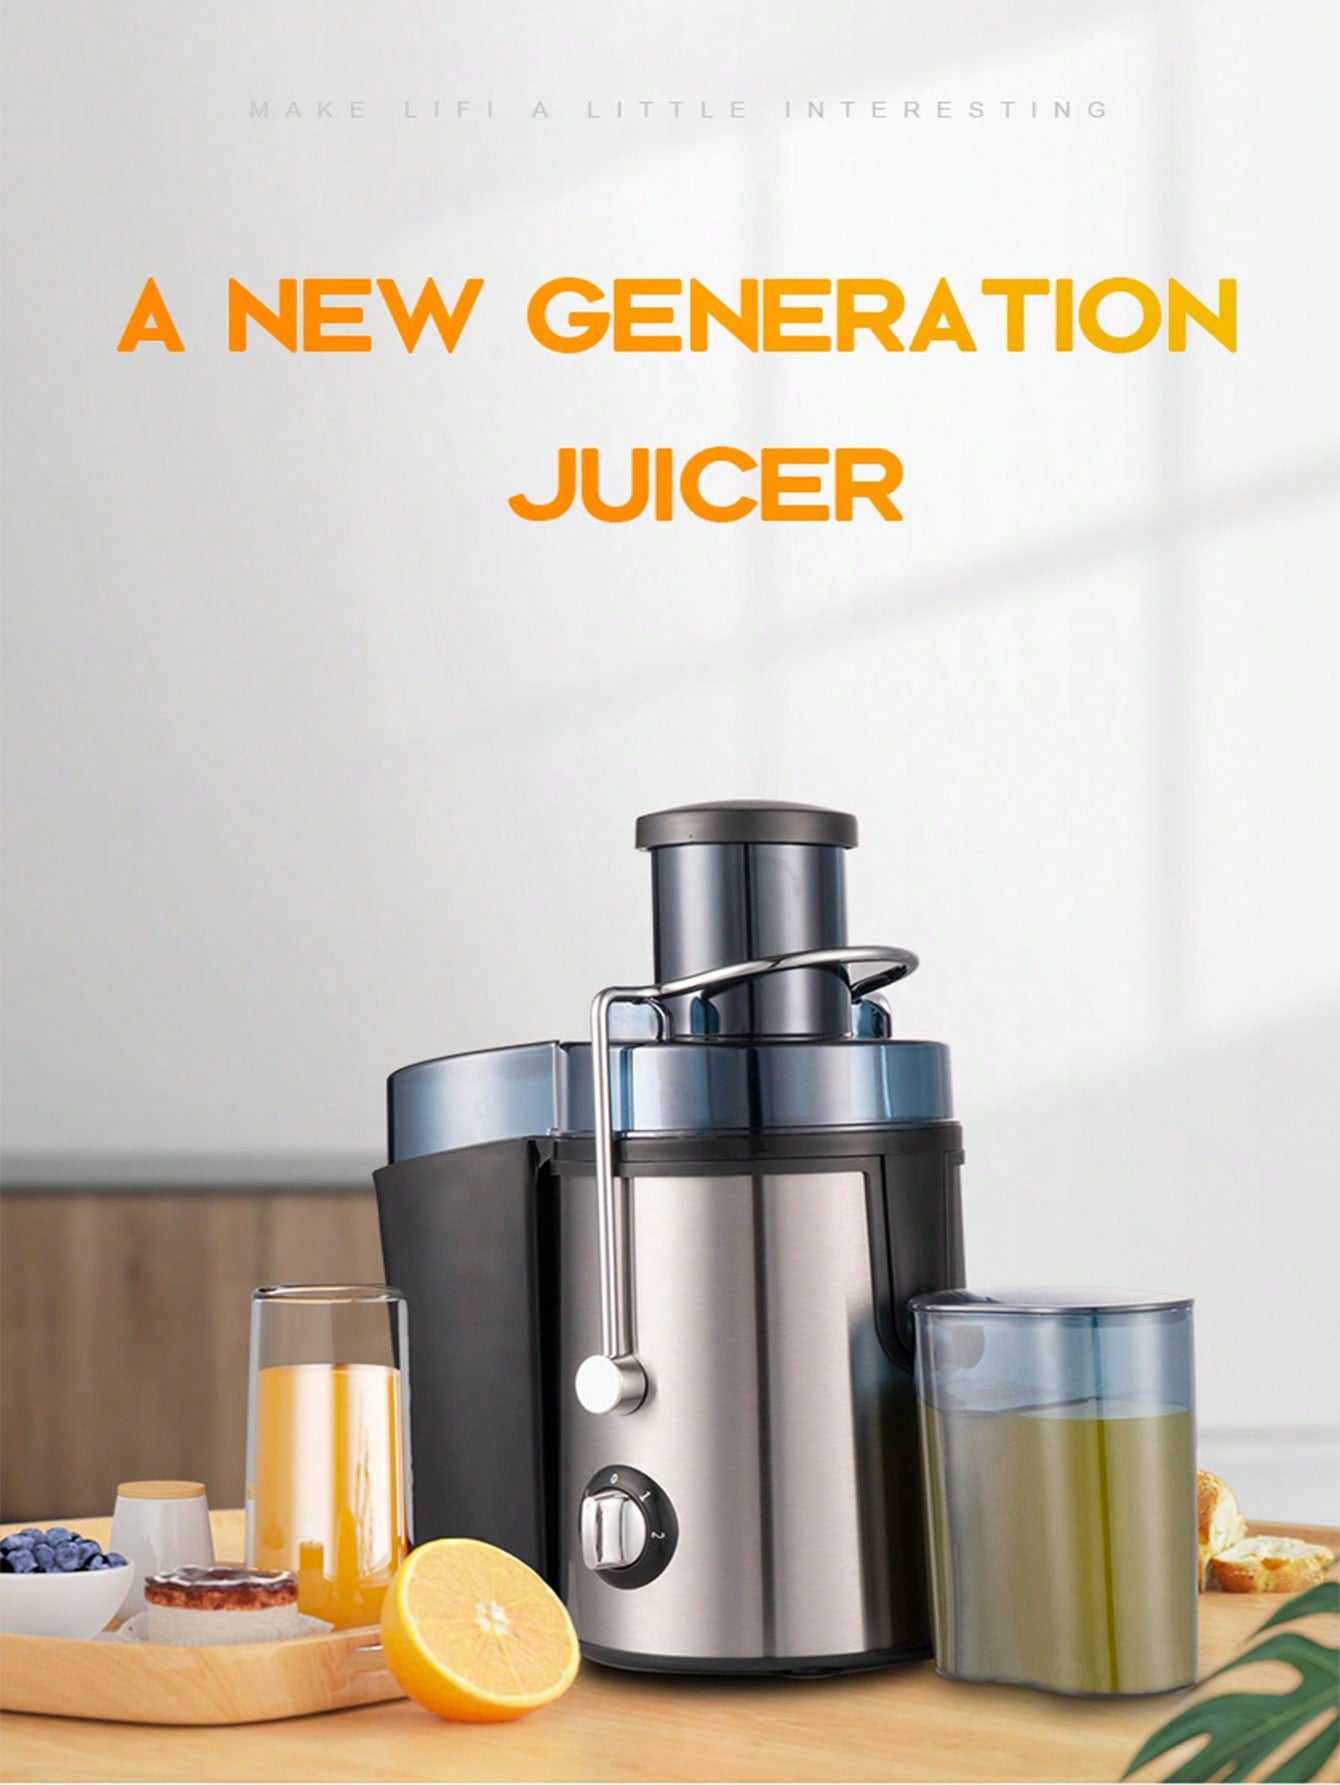 1pc Uk Standard Easy-clean Juicer, Pulp Separation Design, 400w High Power, 65cm Wide Feeder Chute, 450ml Juice Cup, Free Cleaning Brush Included--1